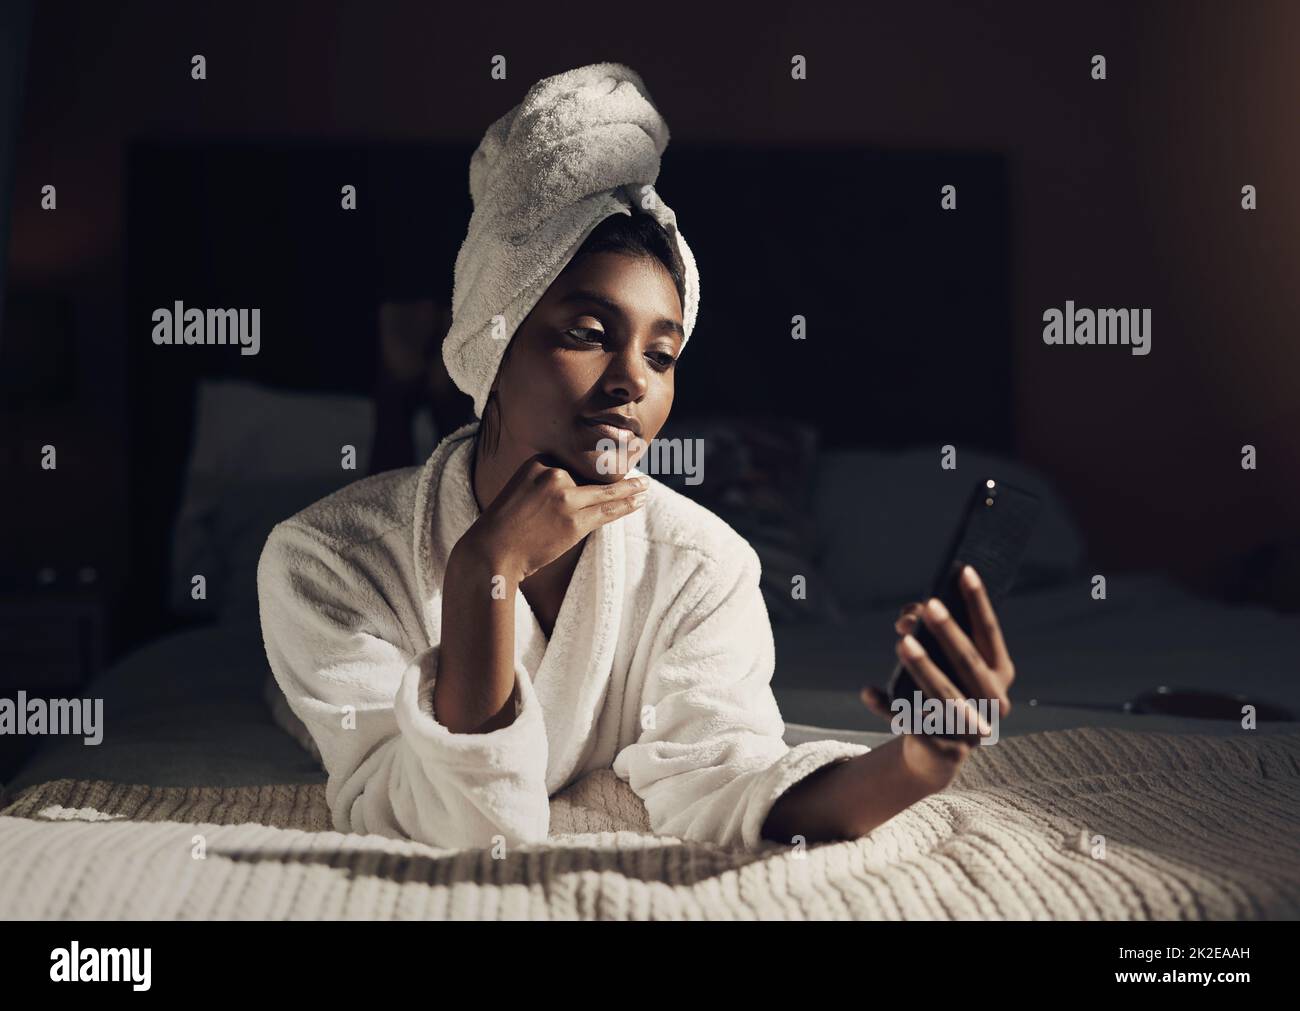 Nothing says you matter like making time for yourself. Shot of a young woman using a smartphone while going through her beauty routine at home. Stock Photo